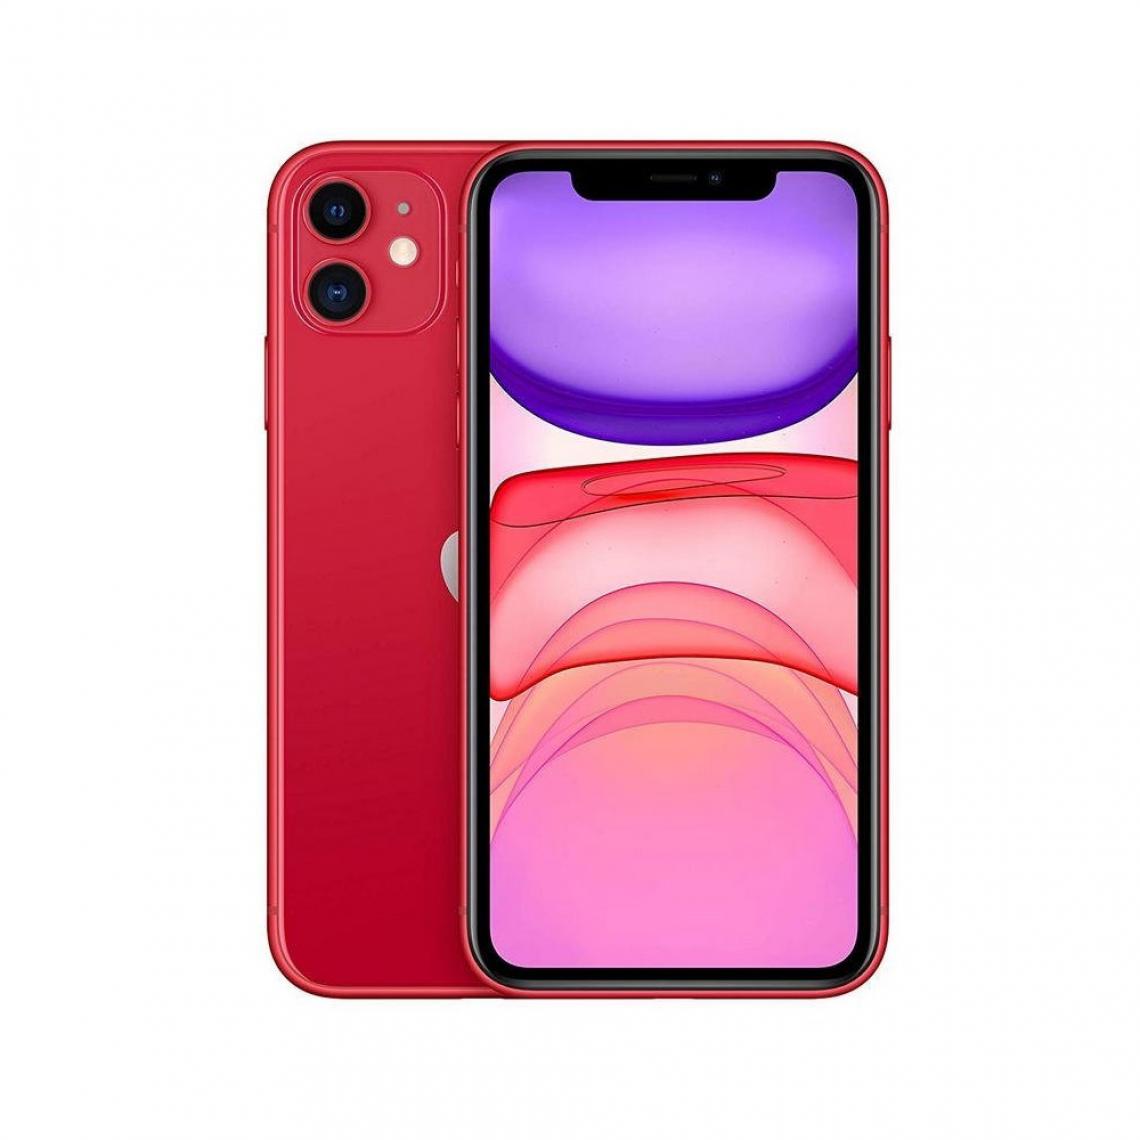 Apple - iPhone 11 64GB, Color (PRODUCT)RED, Batería 3110mAh - iPhone